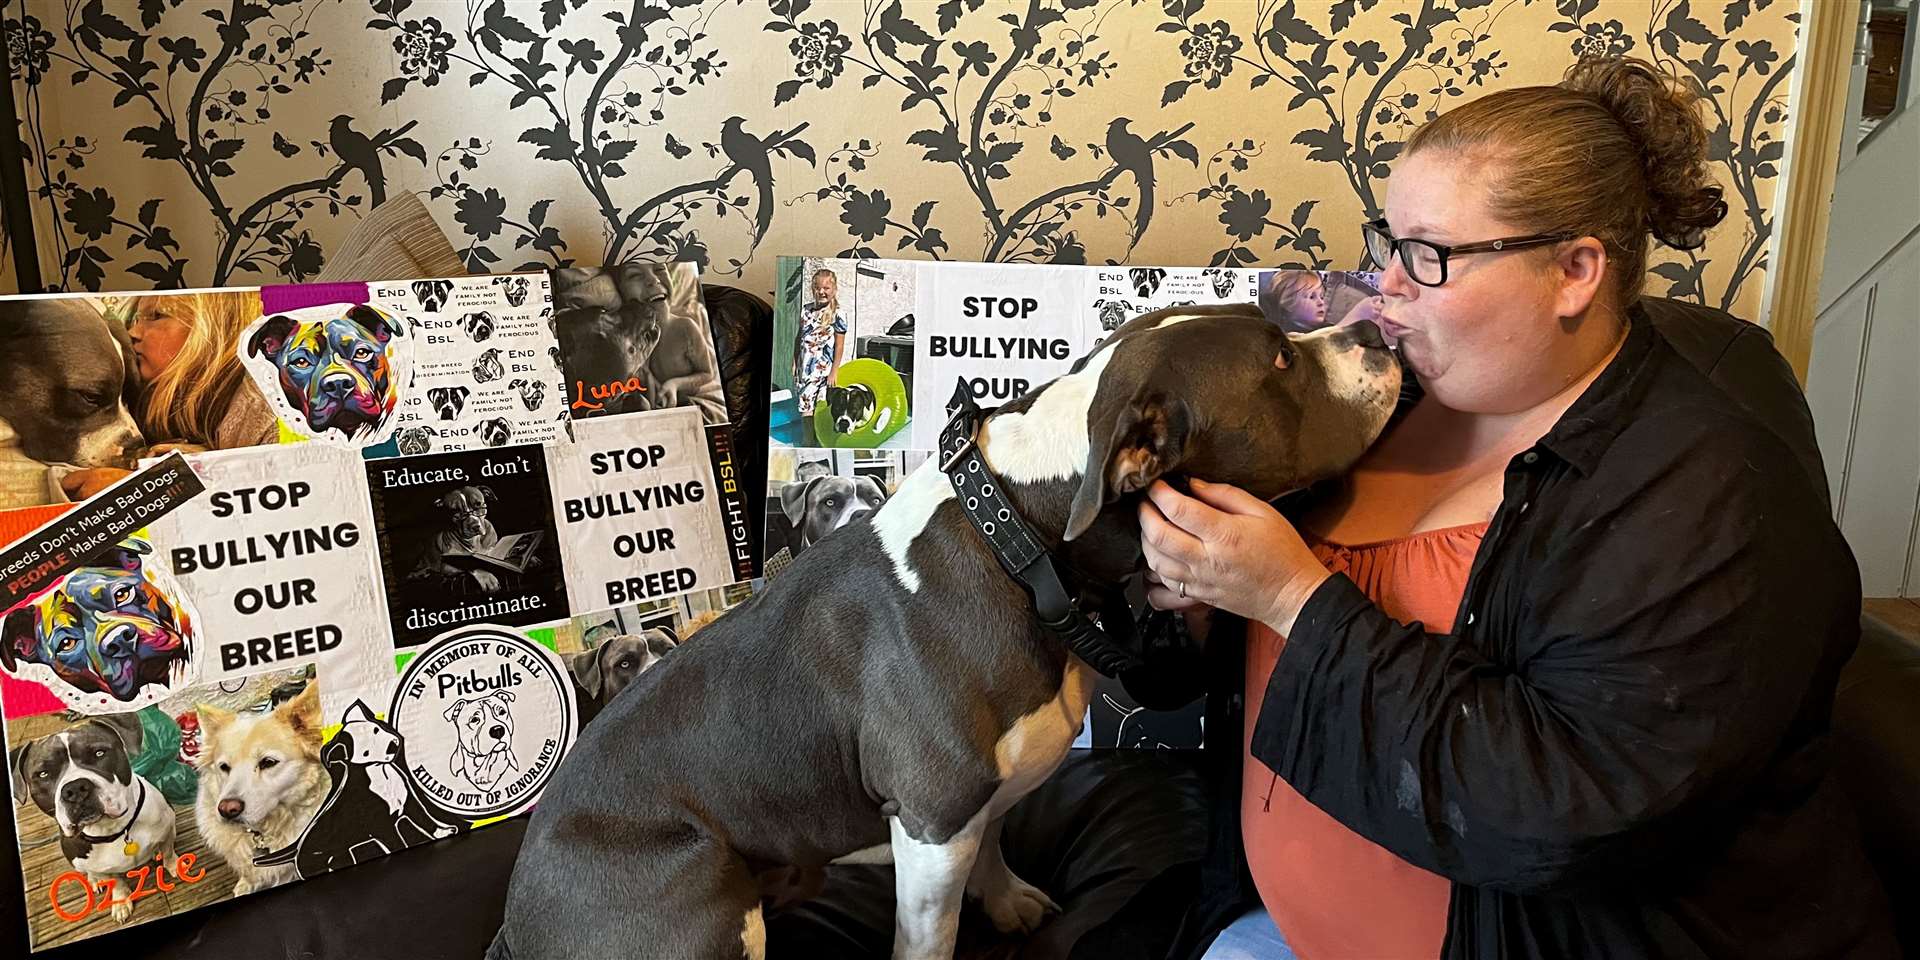 XL Bully owner defends breed and says banning them 'won't work